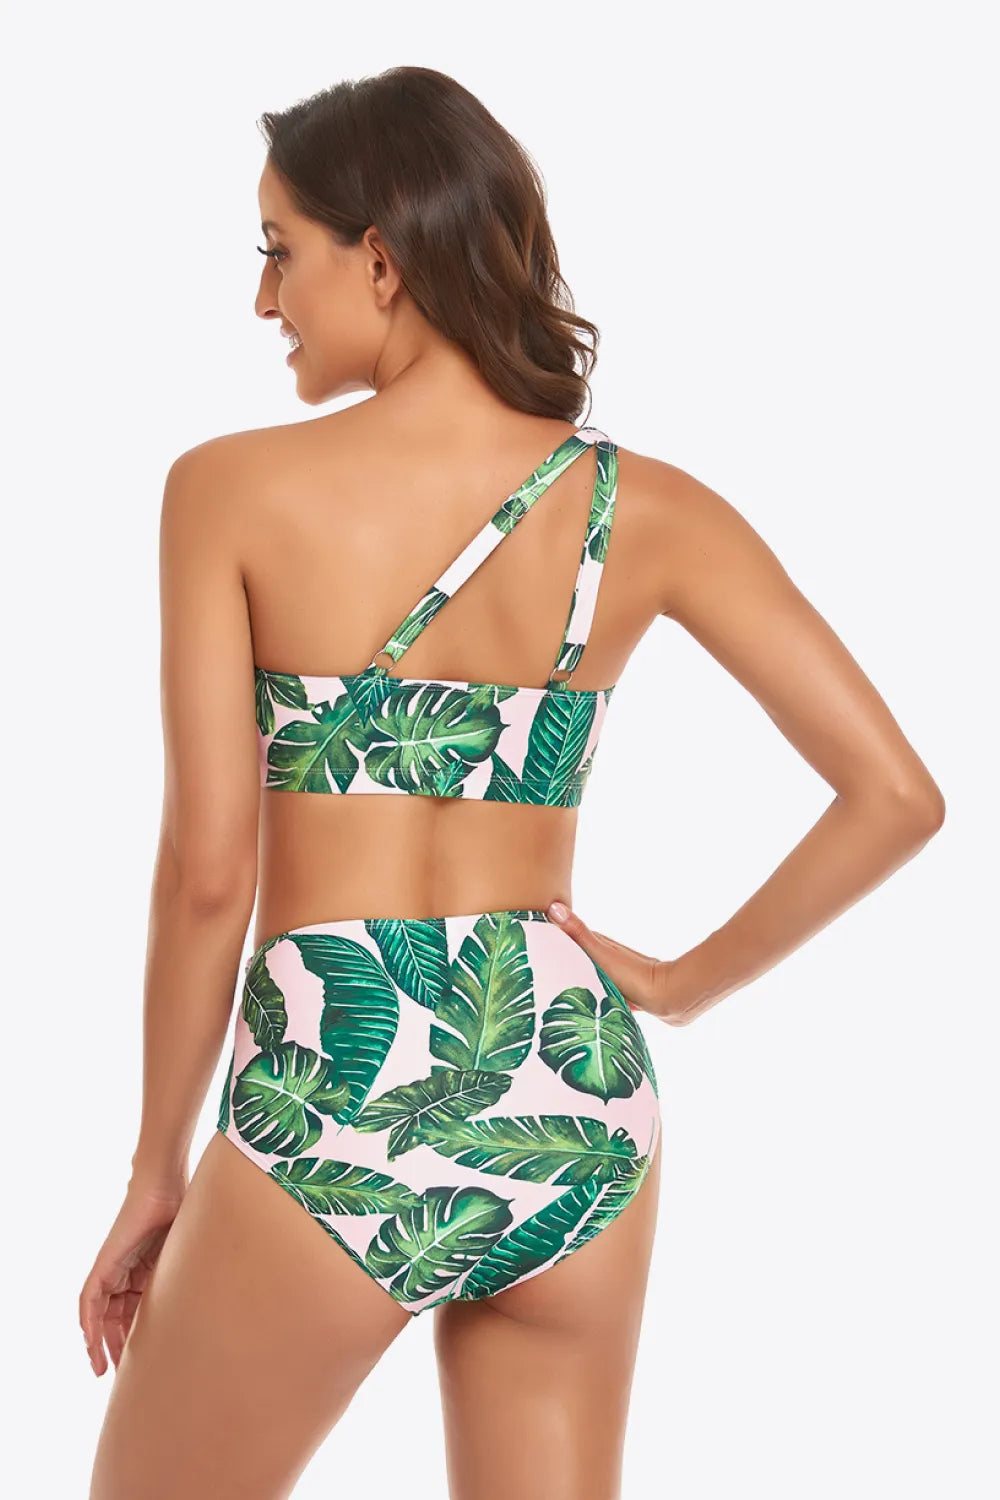 Tropical Ruffled One-Shoulder Bikini Set with a chic buckle. Flattering, high-waisted, available in 4 colors. Perfect for a stylish summer.